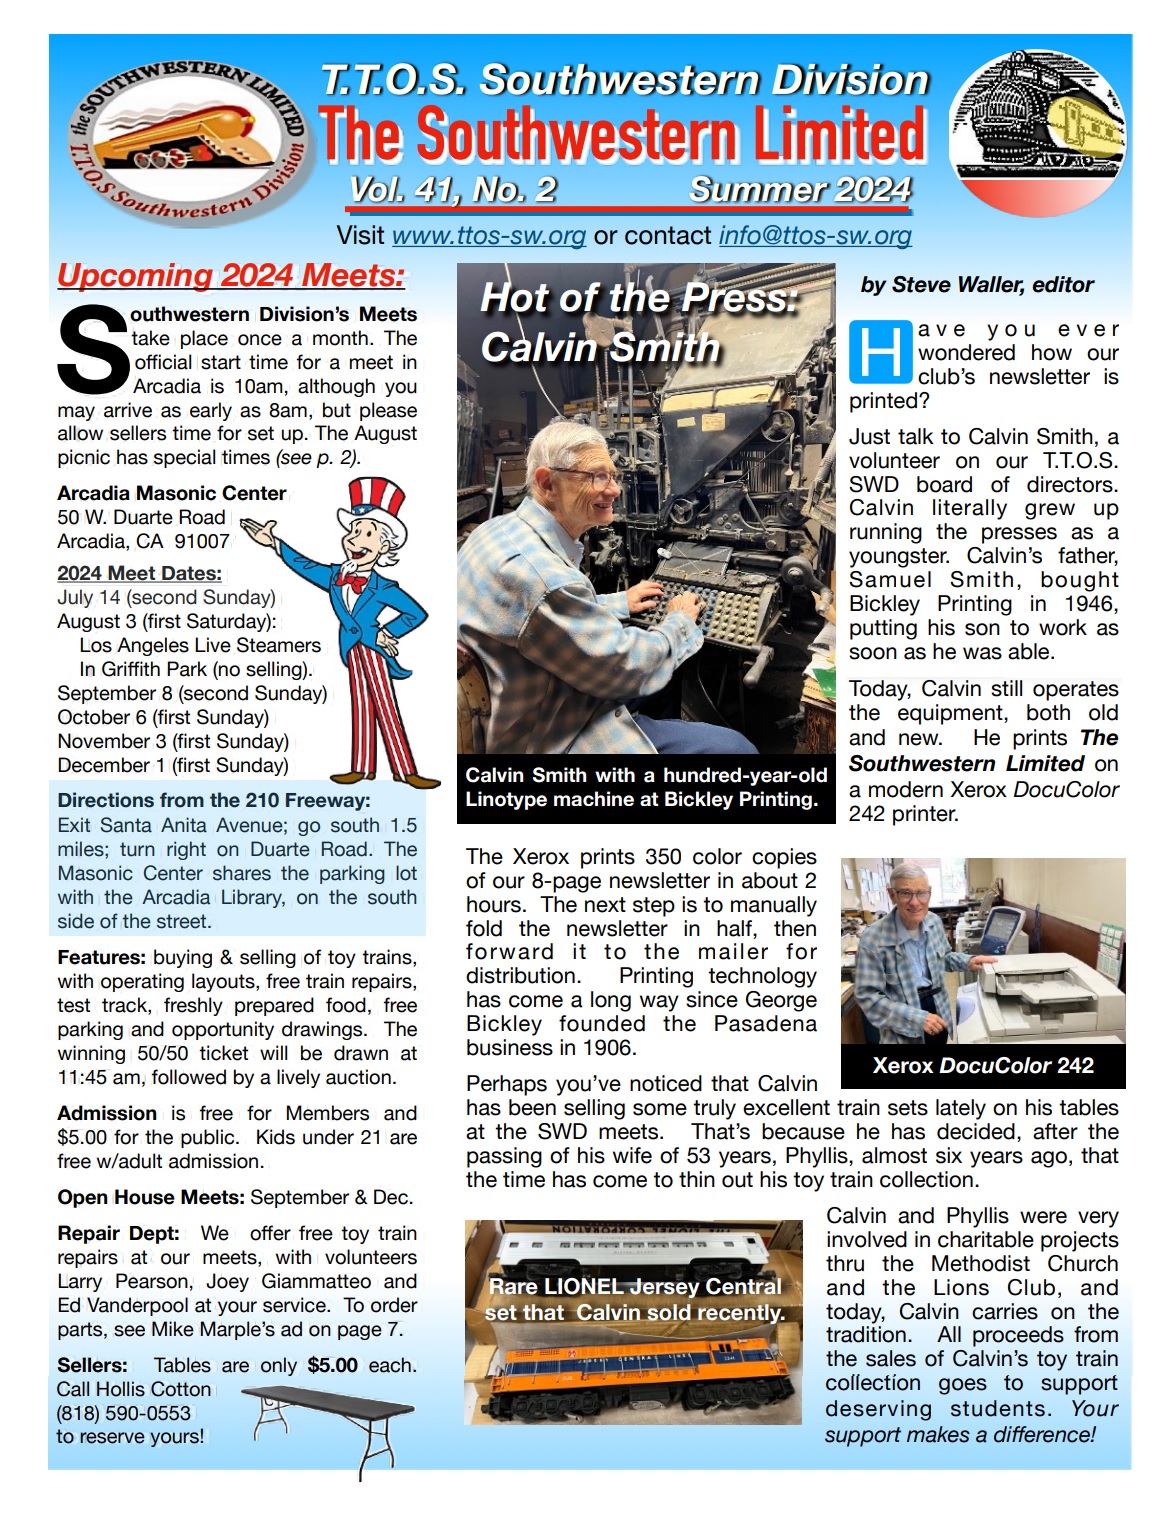 click this link or the image below to view or download the latest edition of the TTOS-SW Division Limited Newsletter